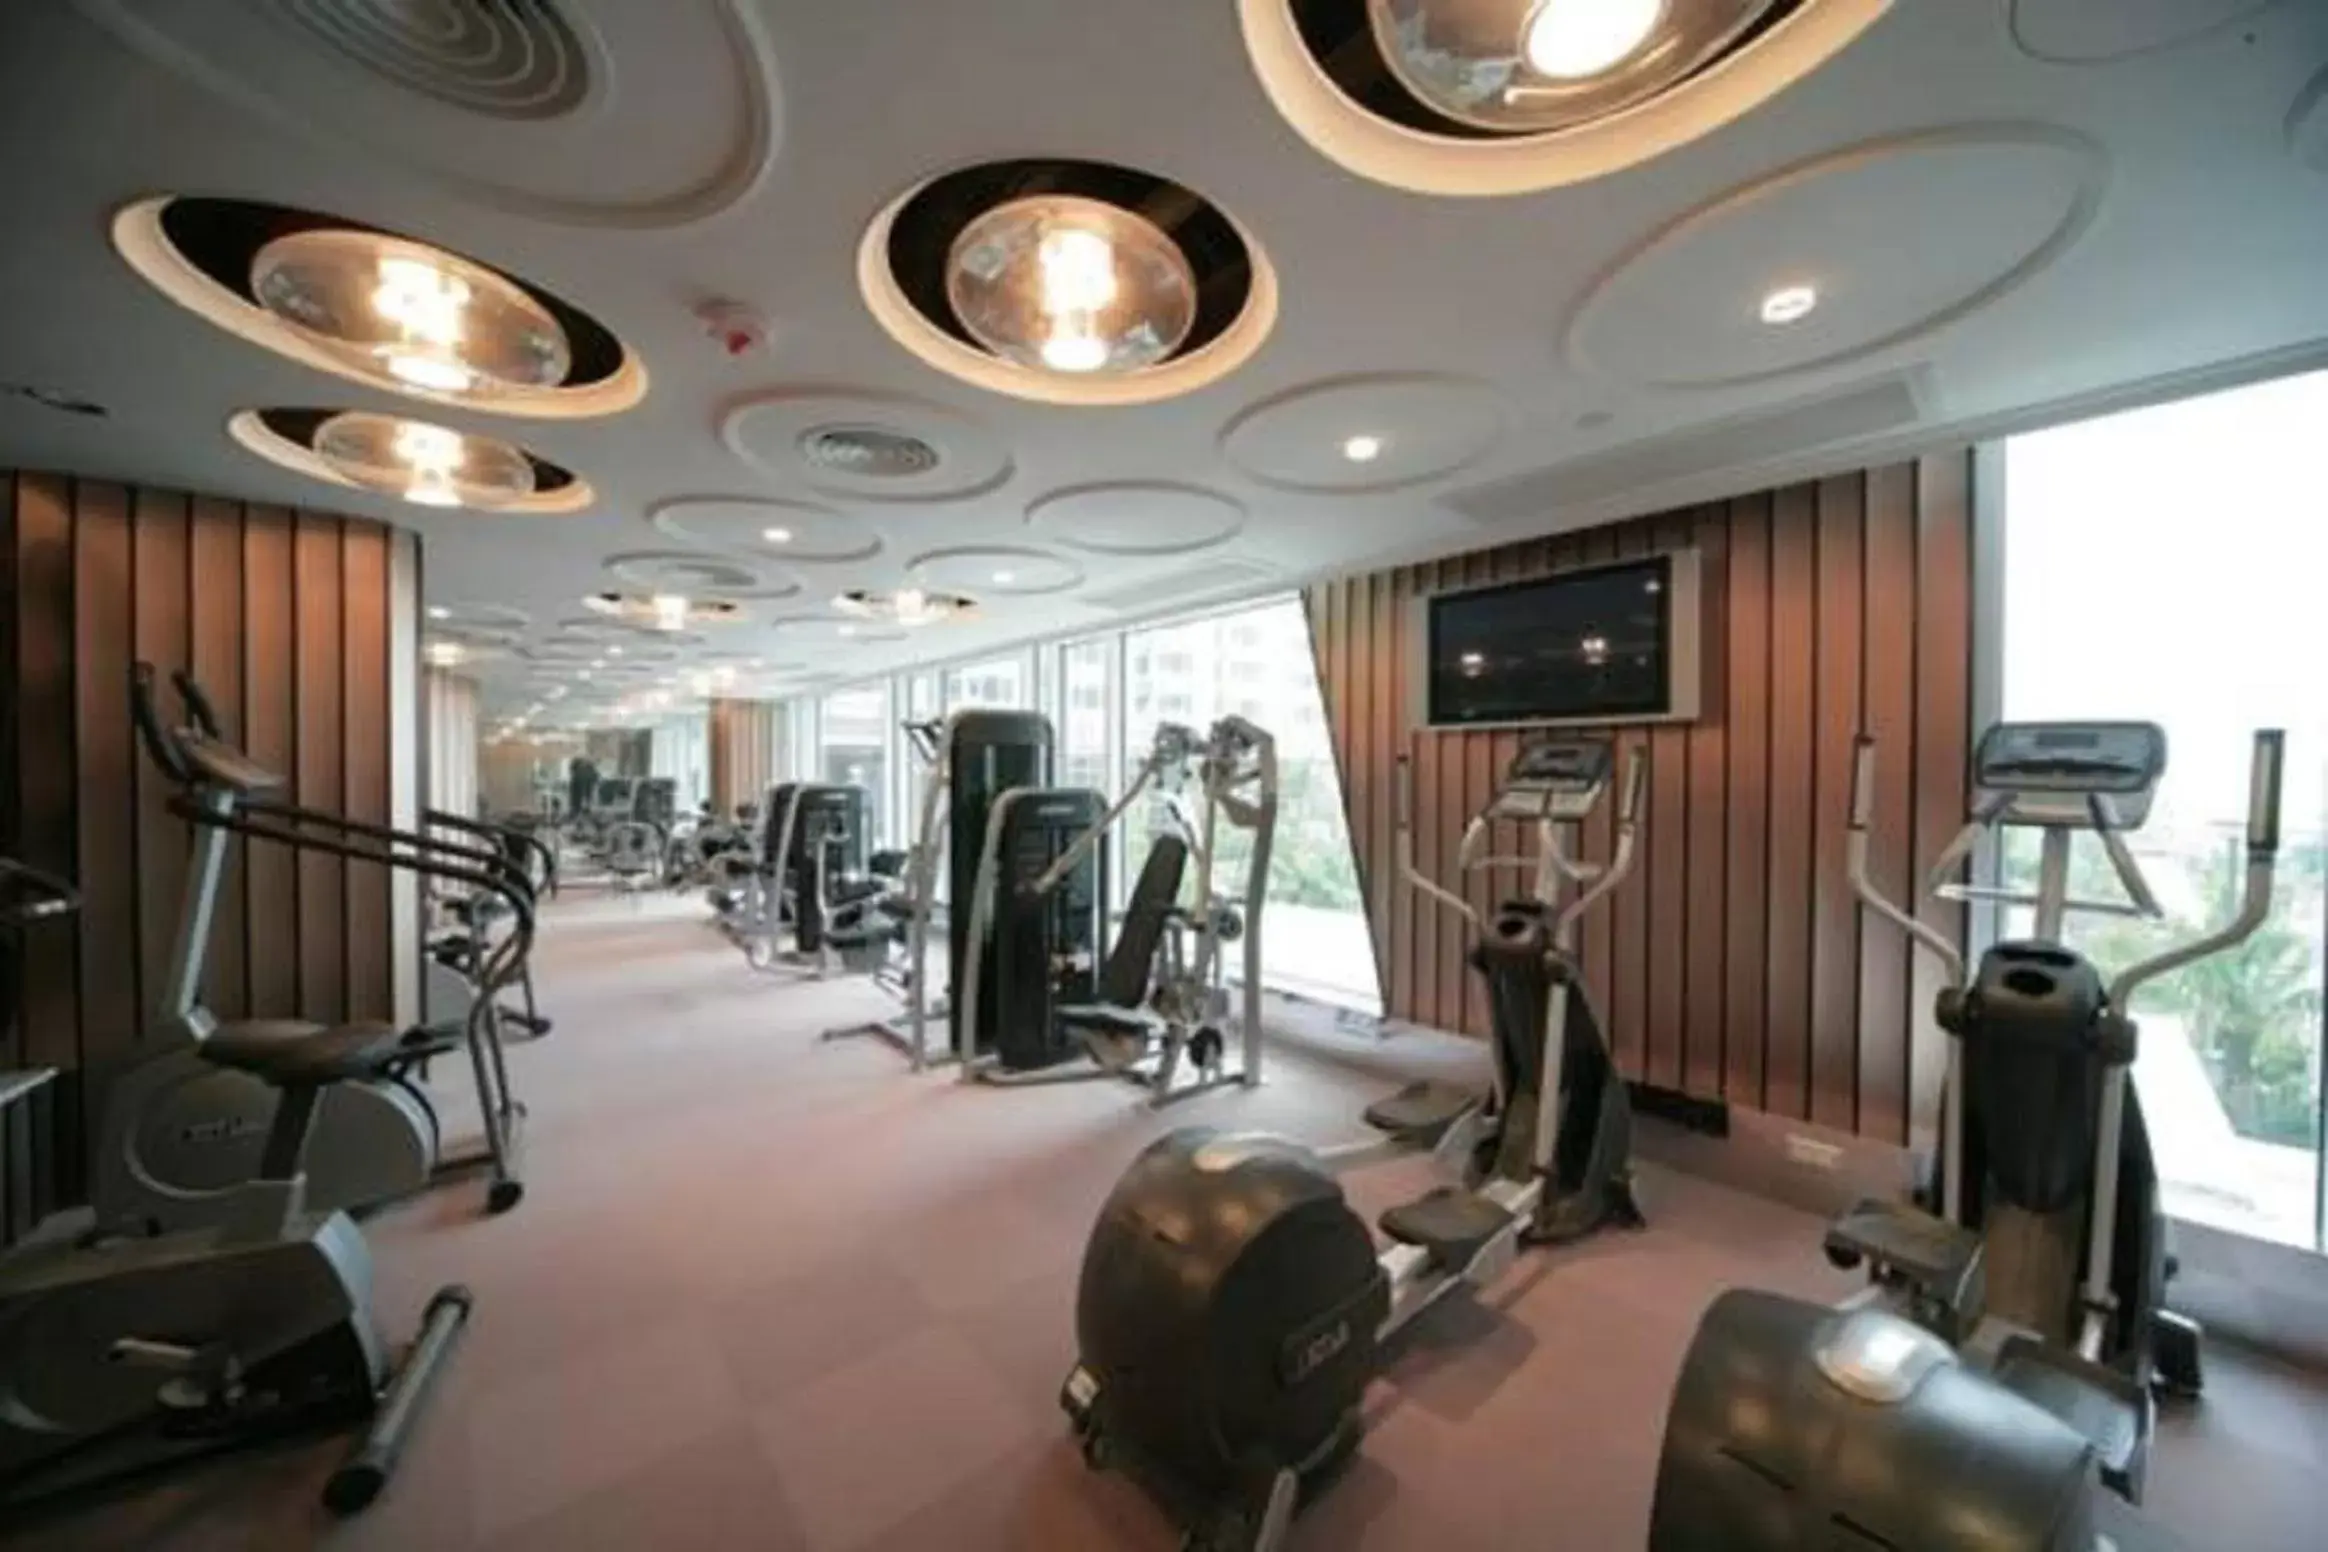 Fitness centre/facilities, Fitness Center/Facilities in Kowloon Harbourfront Hotel